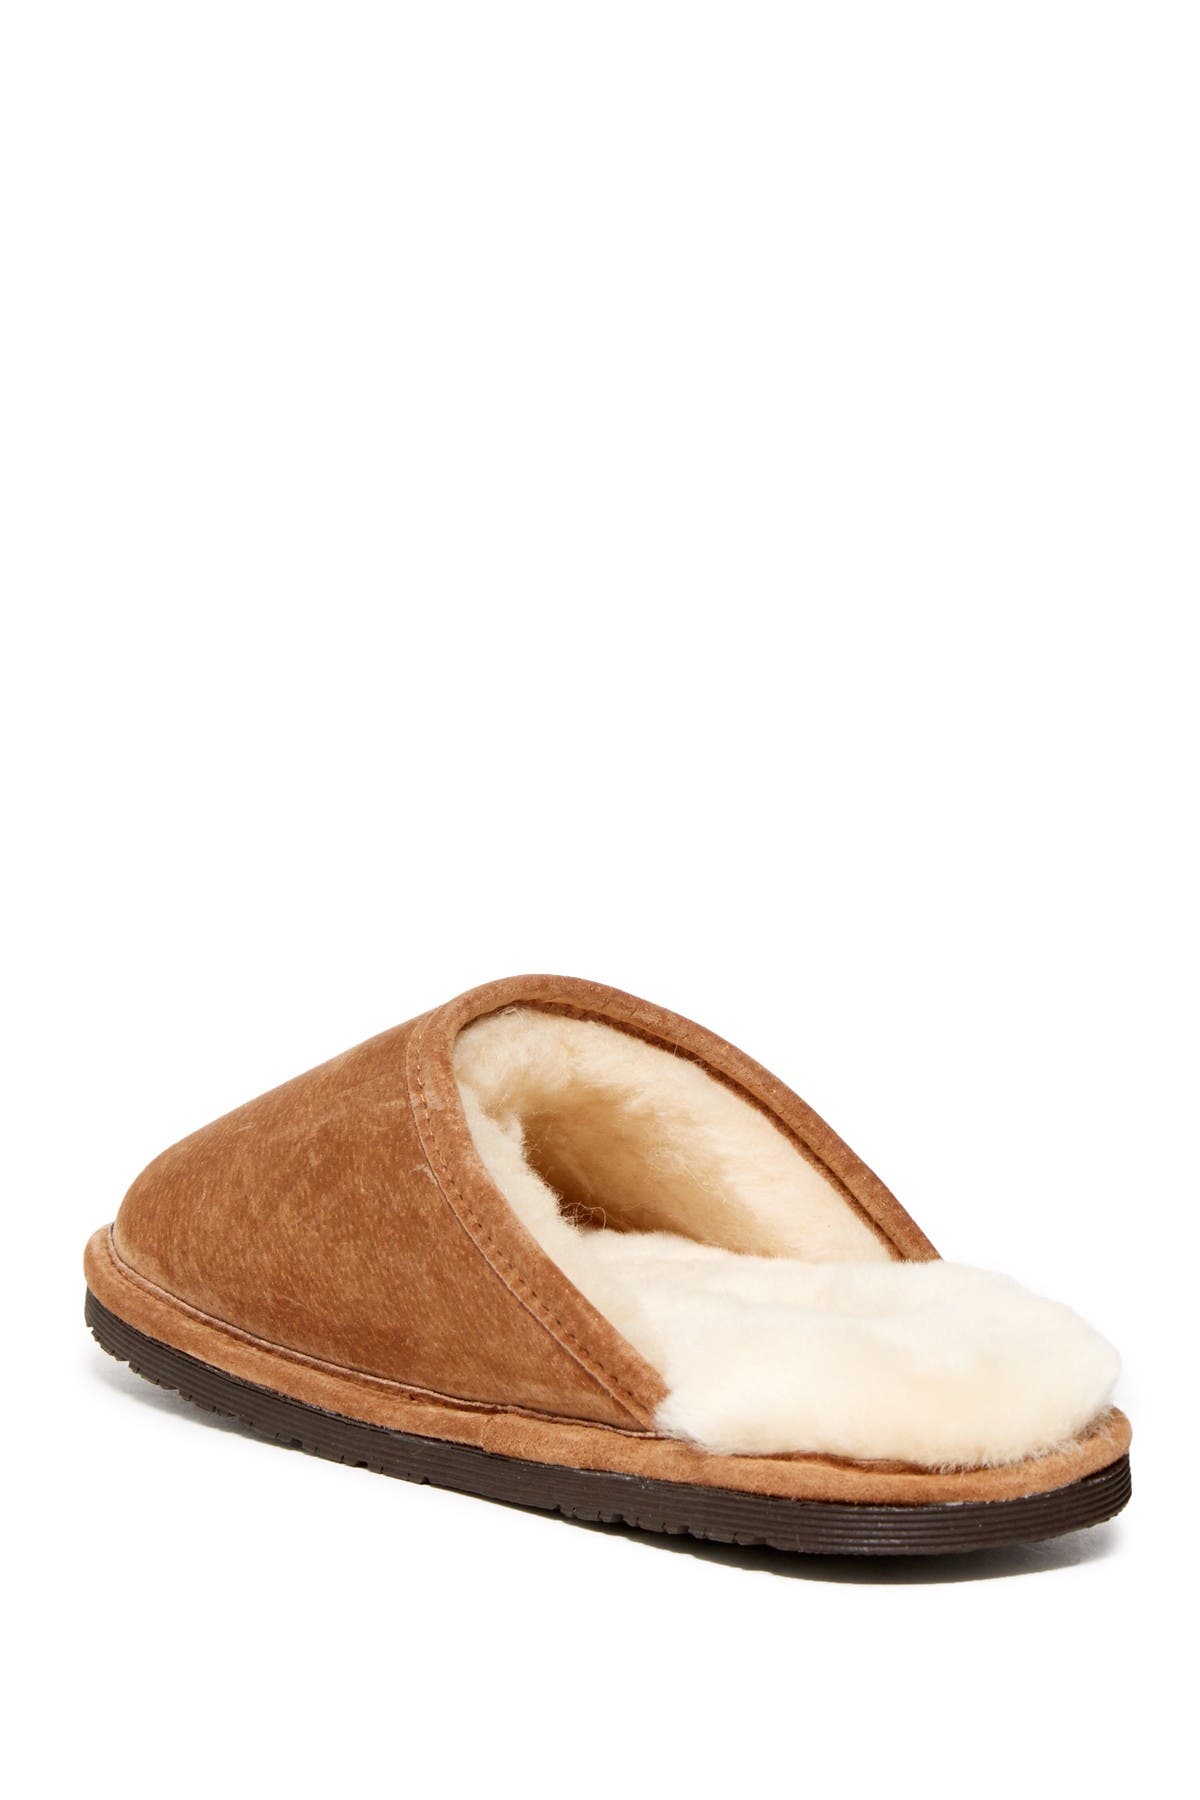 western chief slippers